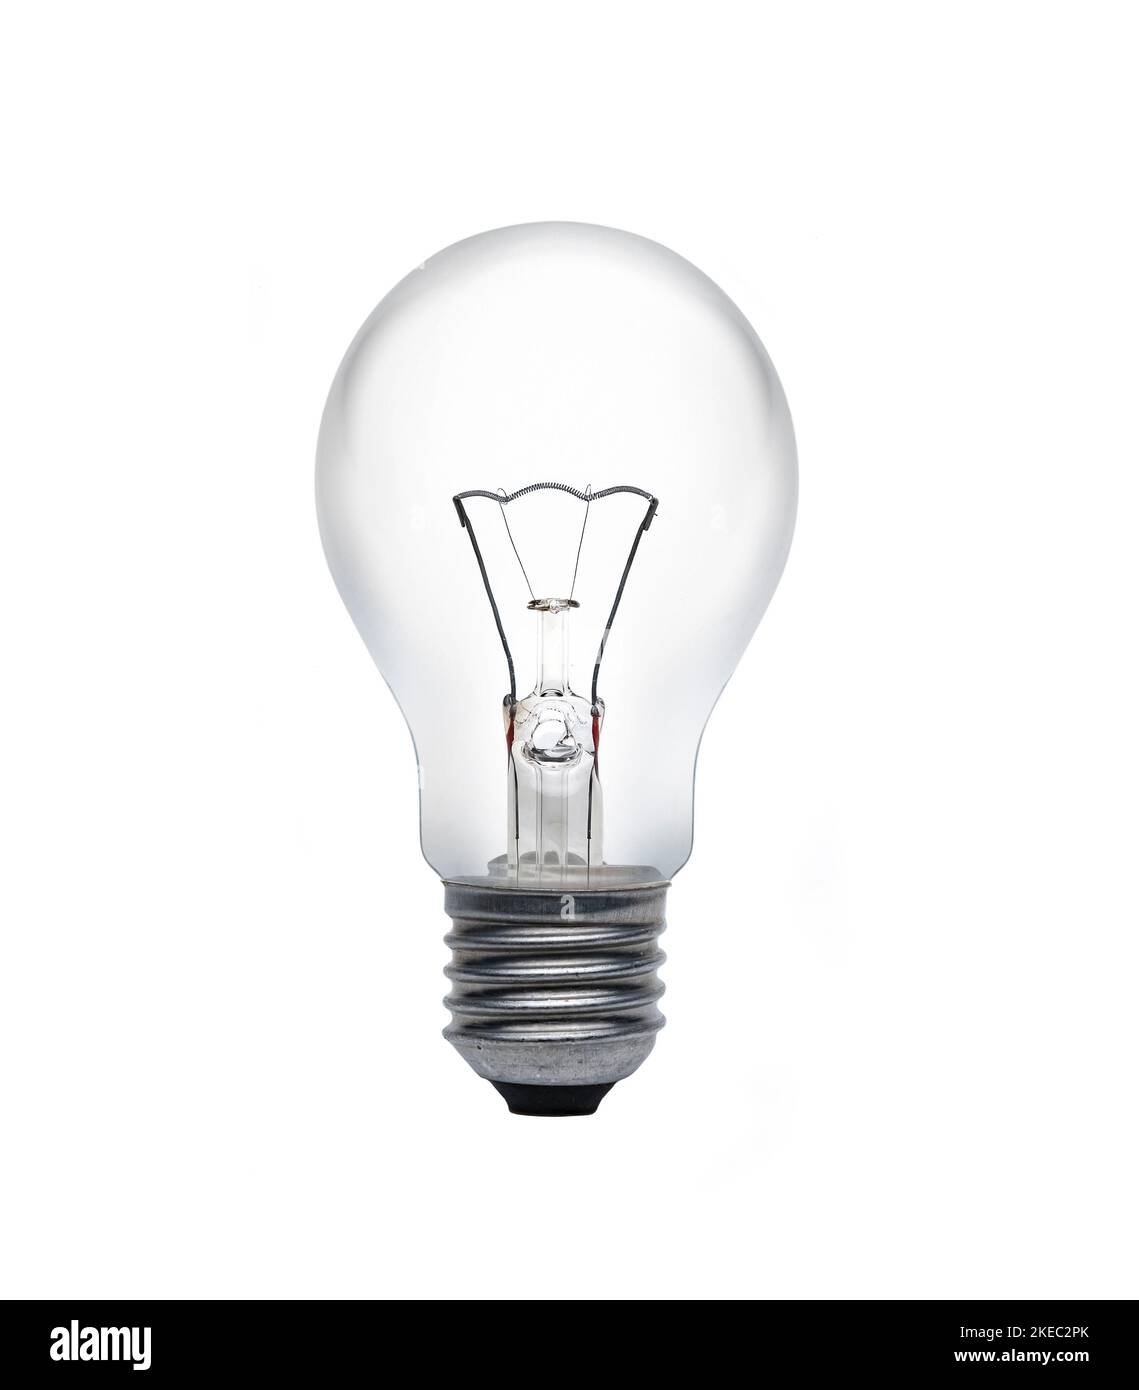 Light bulb with filament isolated on white background Stock Photo